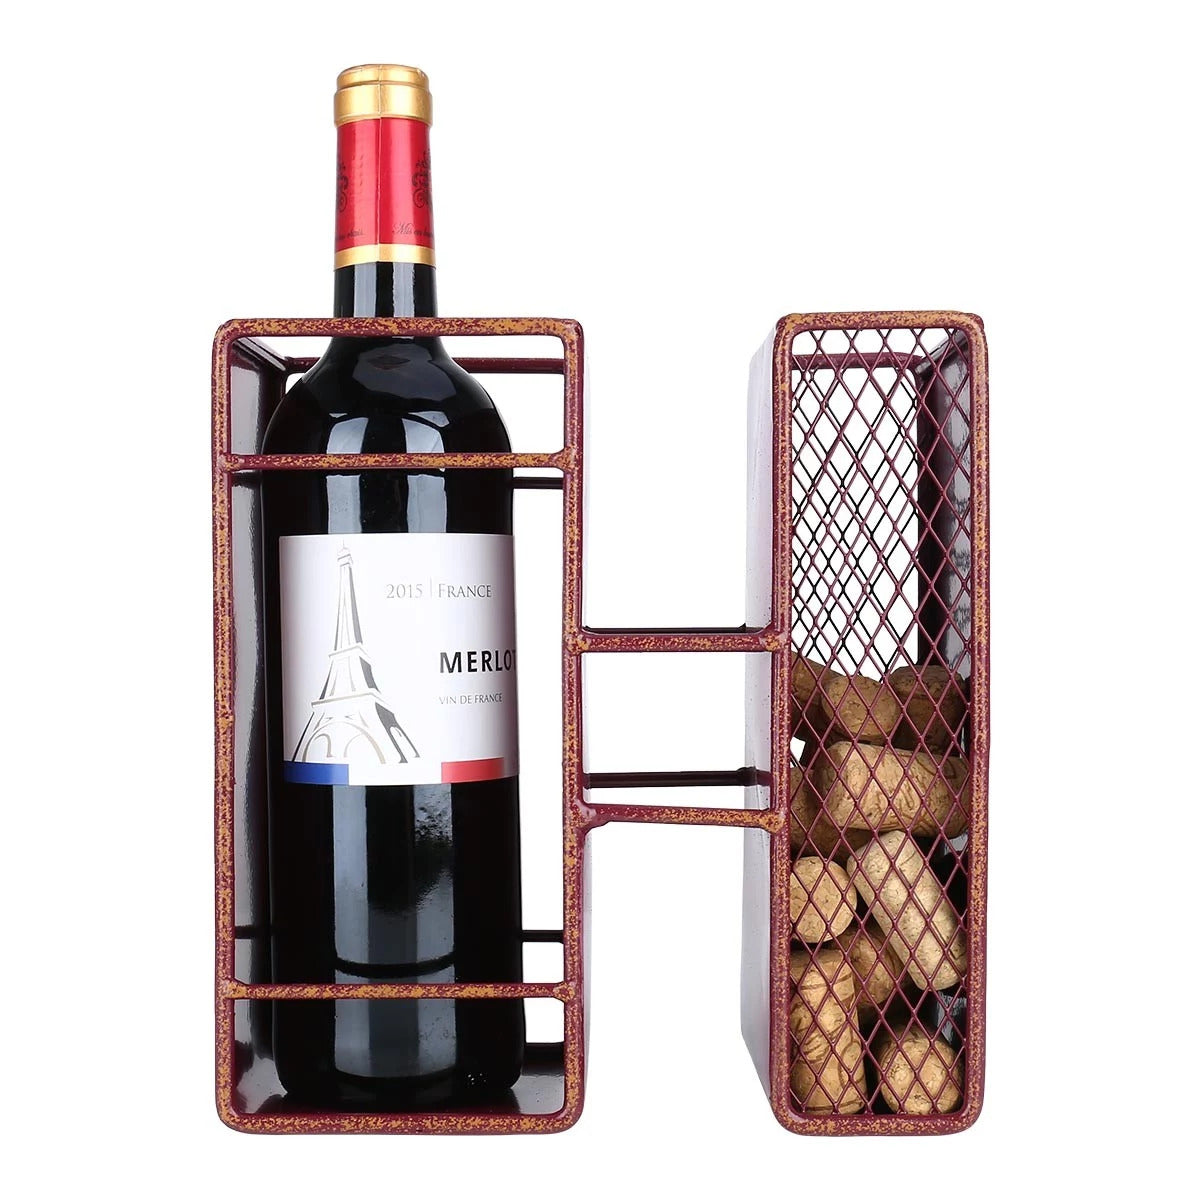 Decorative Letters wine bottle-cork holder is a great item to Housewarming